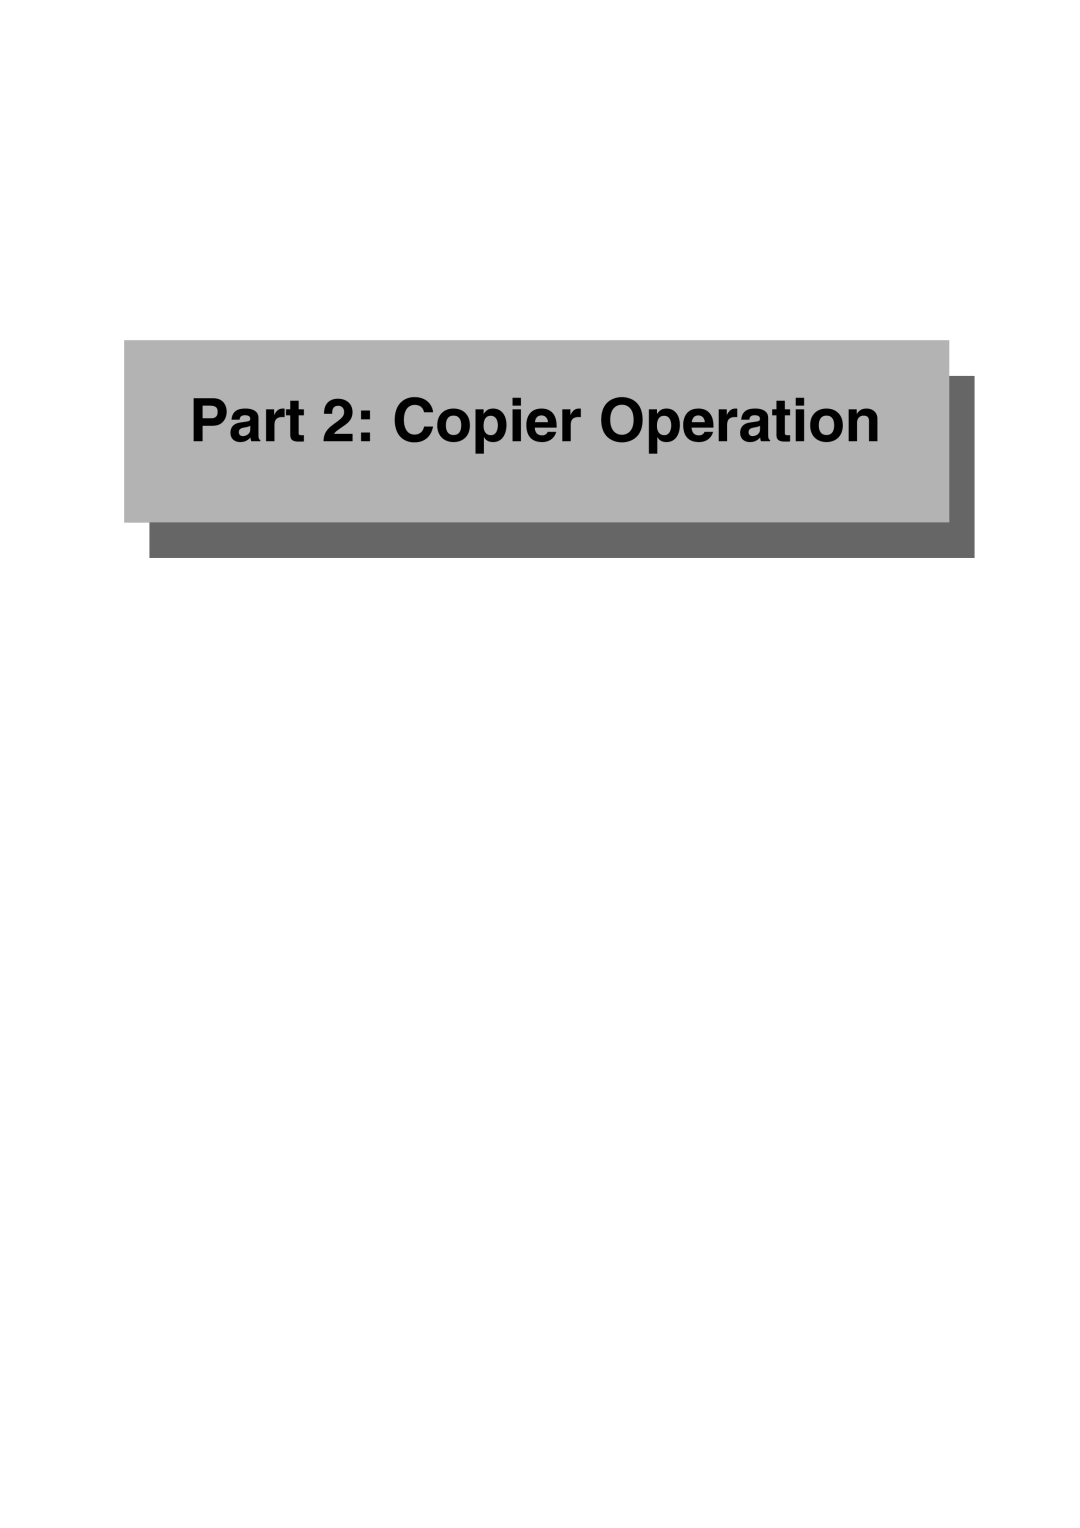 Sharp AR-M700N, AR-M700U, AR-M550N, AR-M620N, AR-M550U, AR-M620U specifications Part 2 Copier Operation 